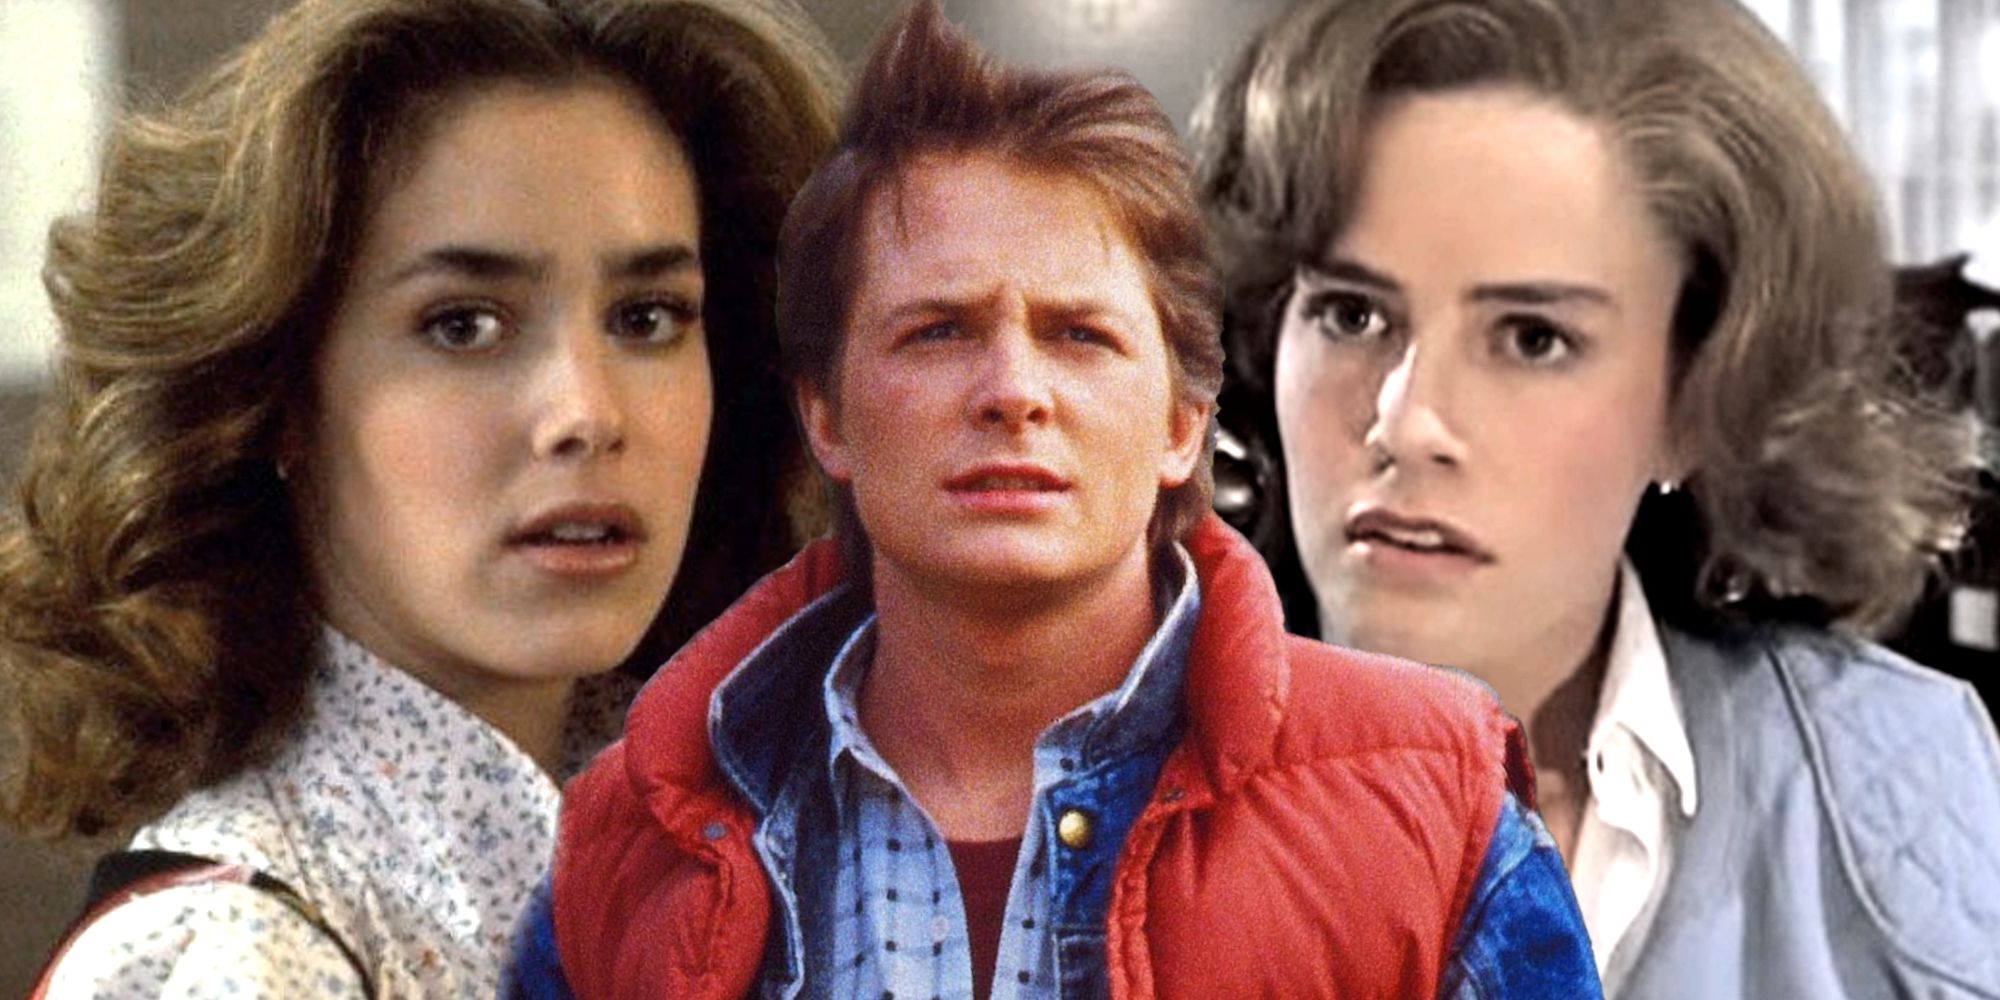 A custom image of Michael J Fox as Marty McFly with Claudia Wells and Elisabeth Shue as Jennifer Parker in Back to the Future Part I and II